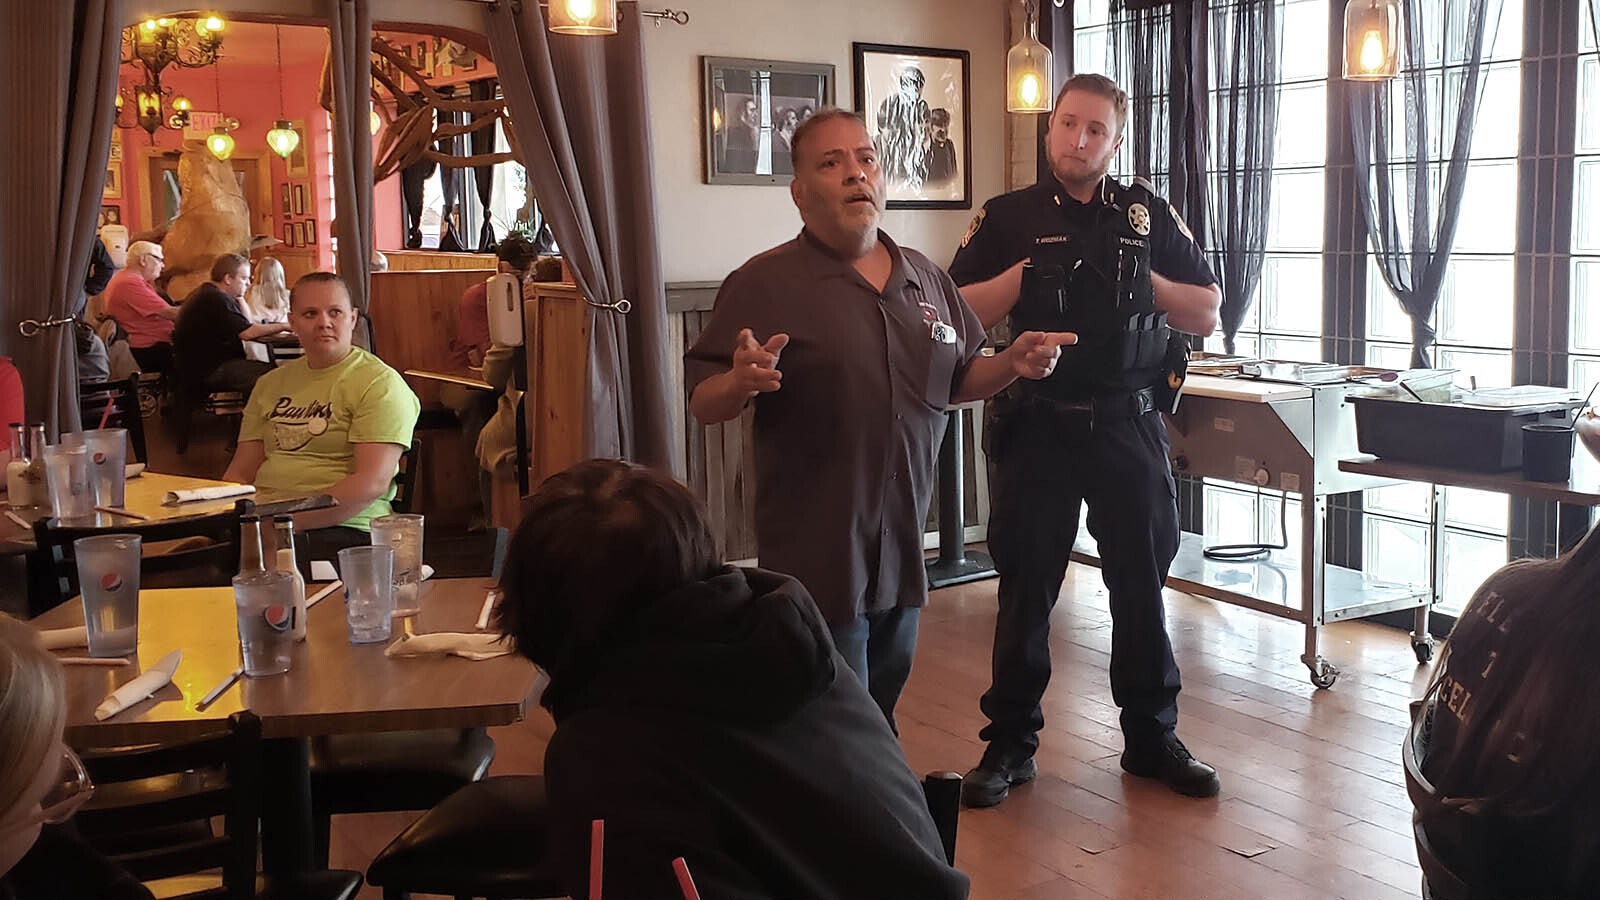 Mike Lujan, center, talks about his short-lived basketball career to illustrate a point about making the best of things on the court while Officer Ted Wozniak looks on.